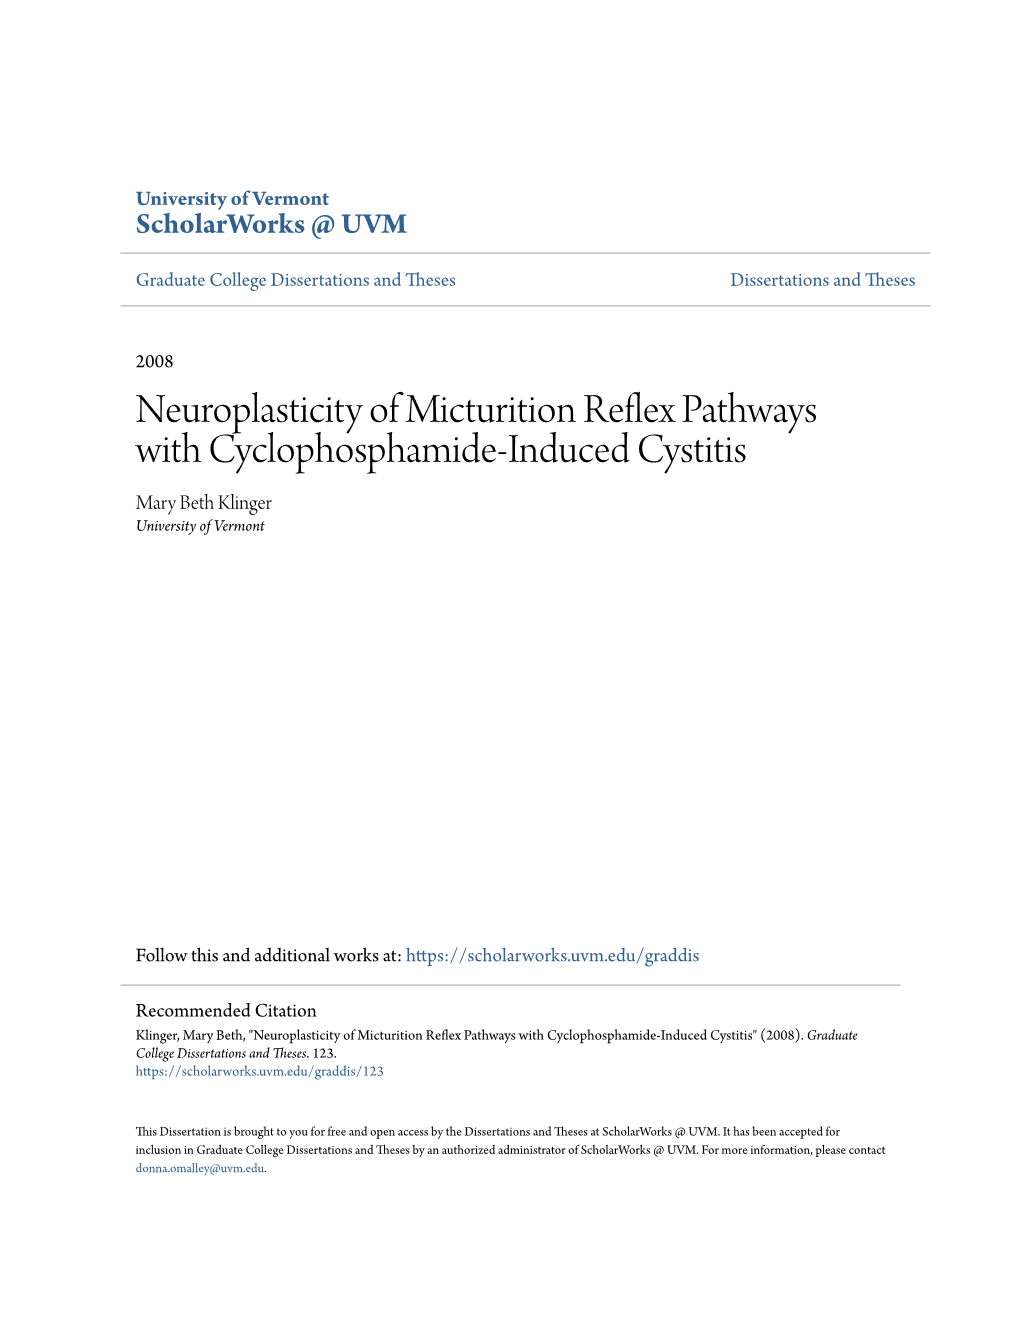 Neuroplasticity of Micturition Reflex Pathways with Cyclophosphamide-Induced Cystitis